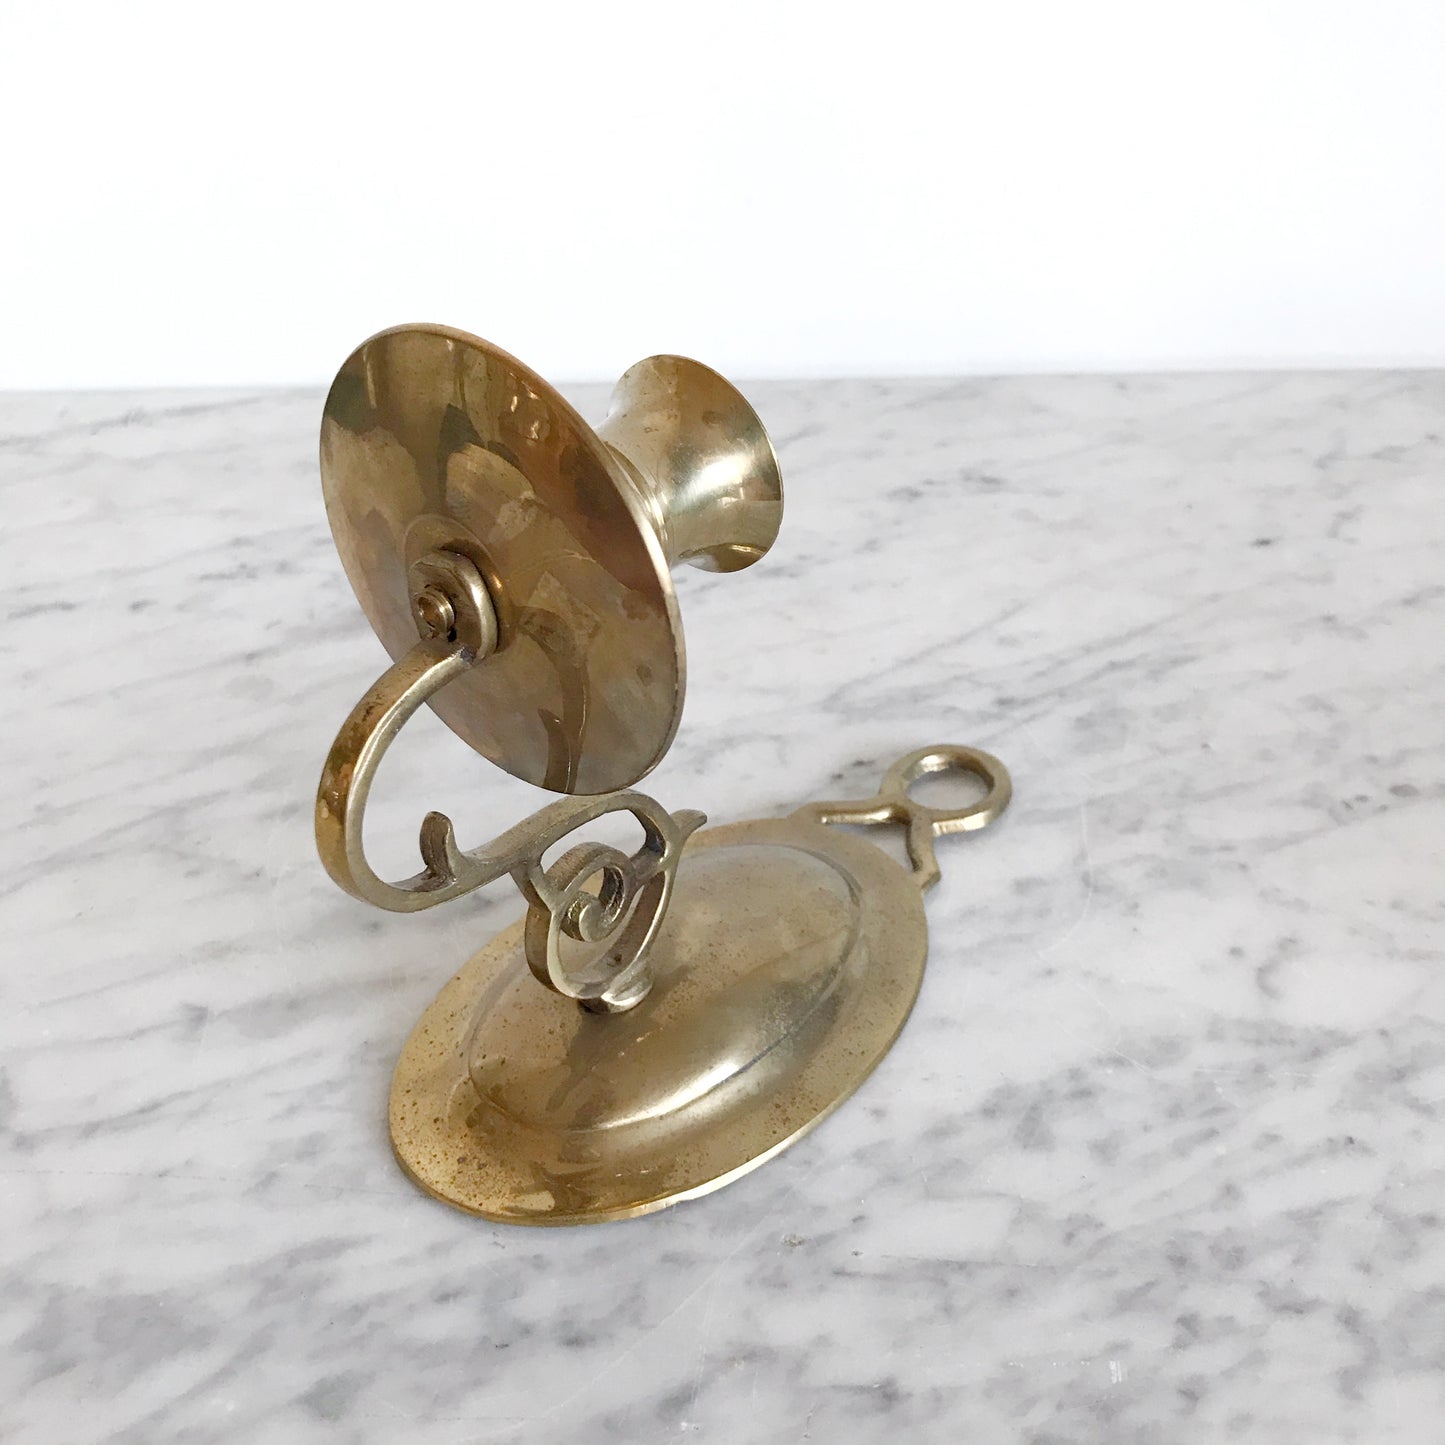 Pair of Vintage Brass Candle Sconces